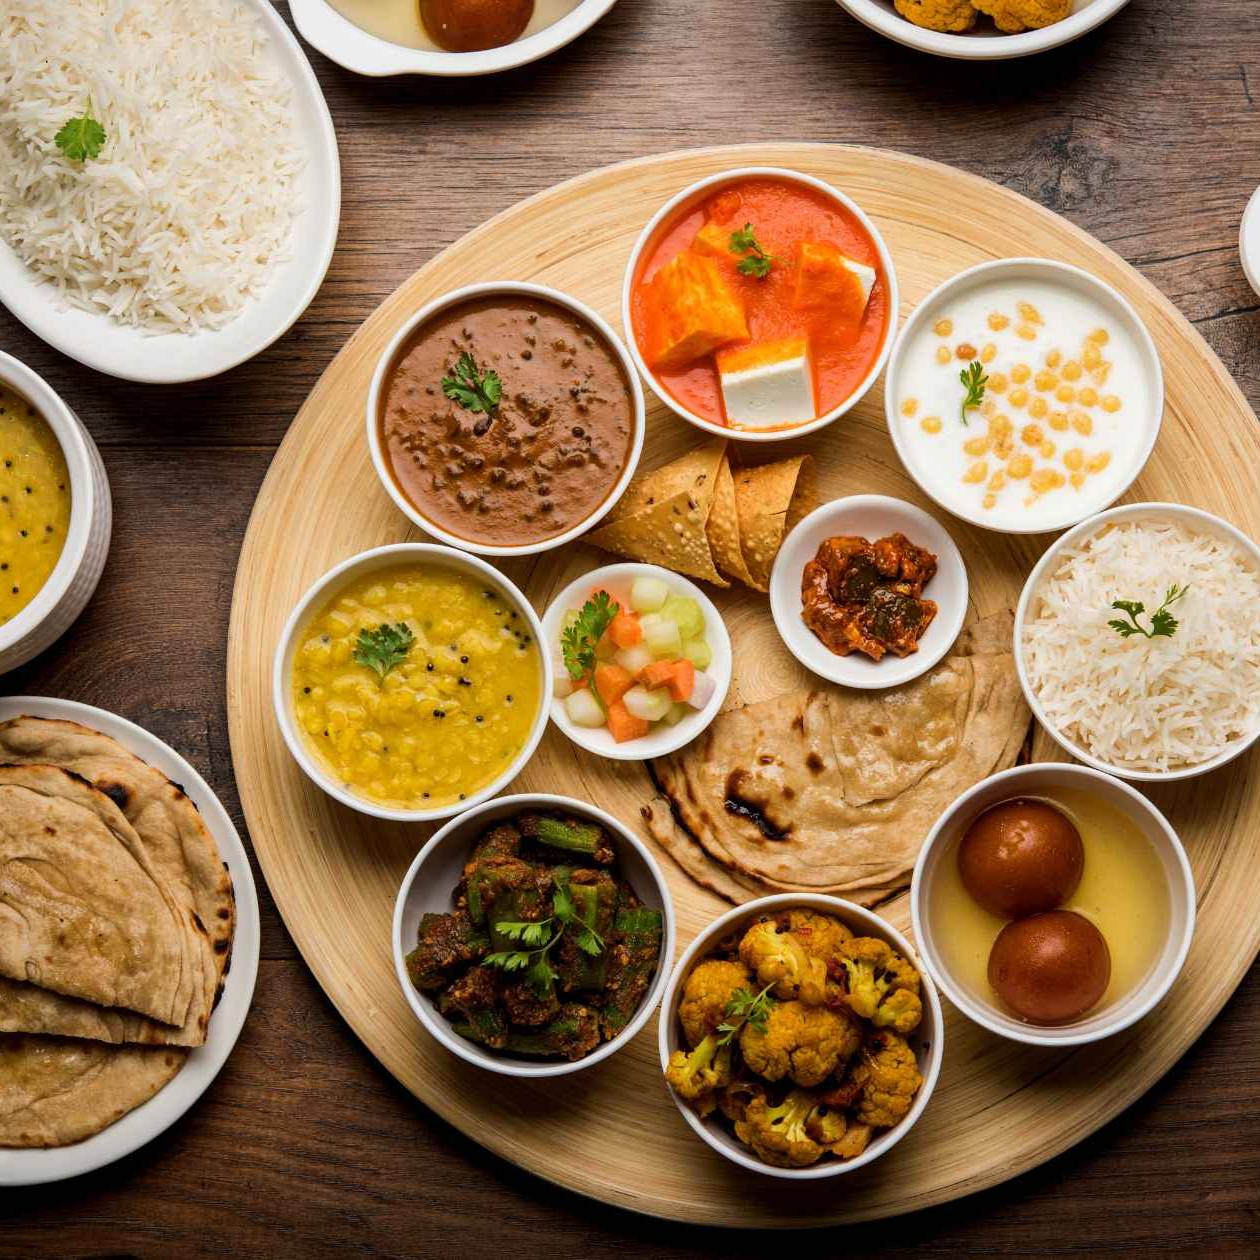 Unlimited Food in Ahmedabad